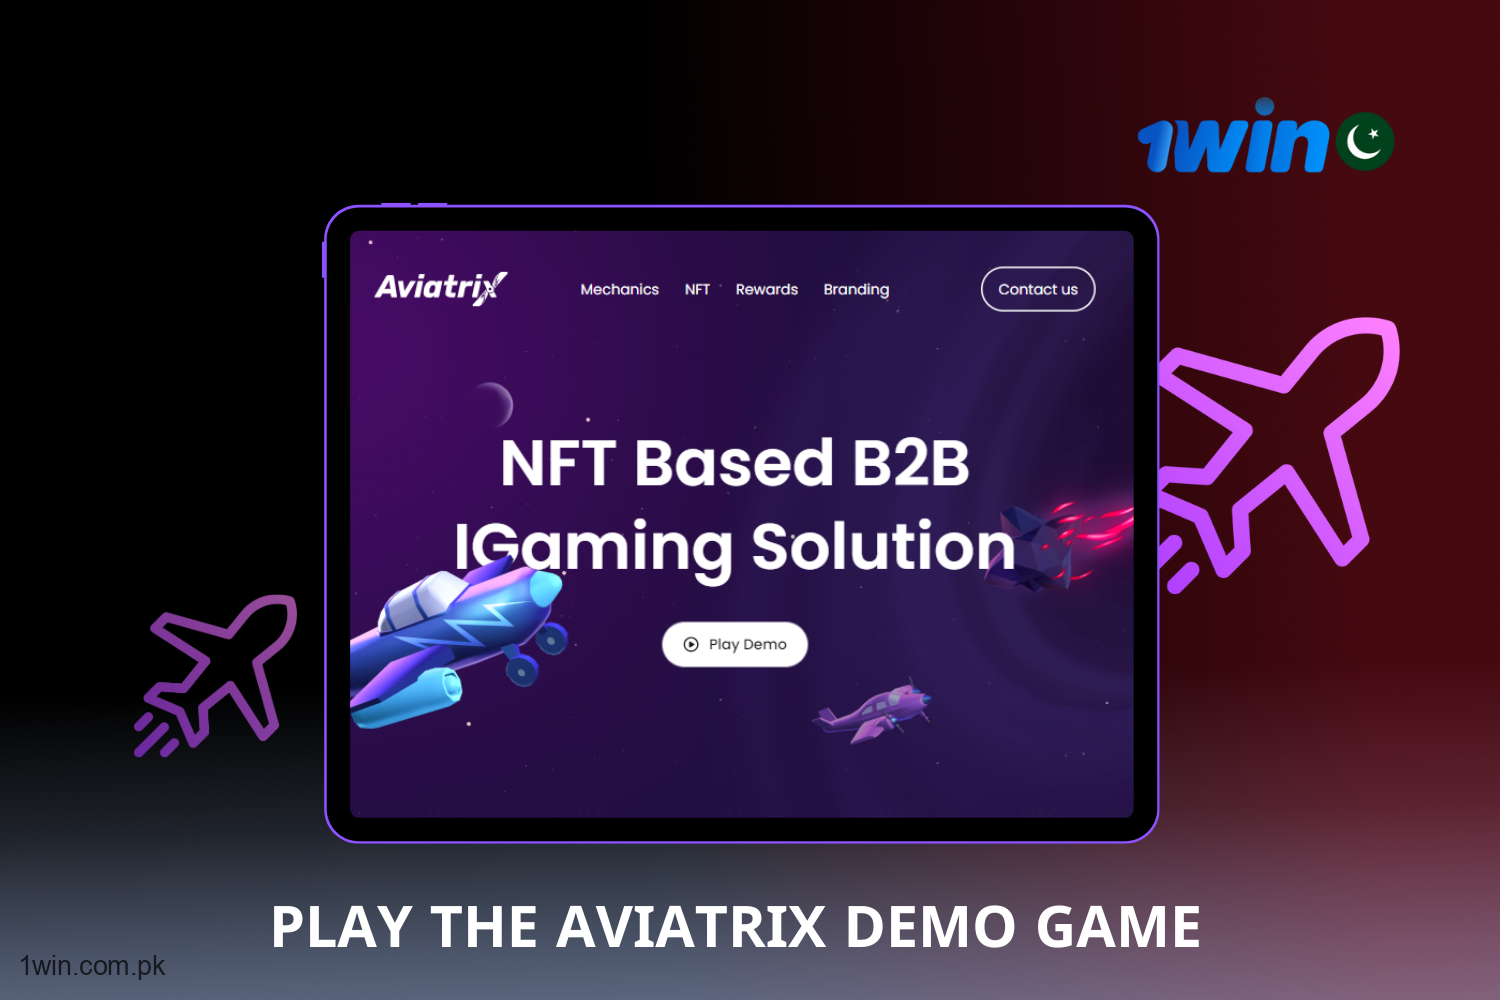 1win players from Pakistan can play Aviatrix for free in demo mode to familiarize themselves with the game and develop a strategy.